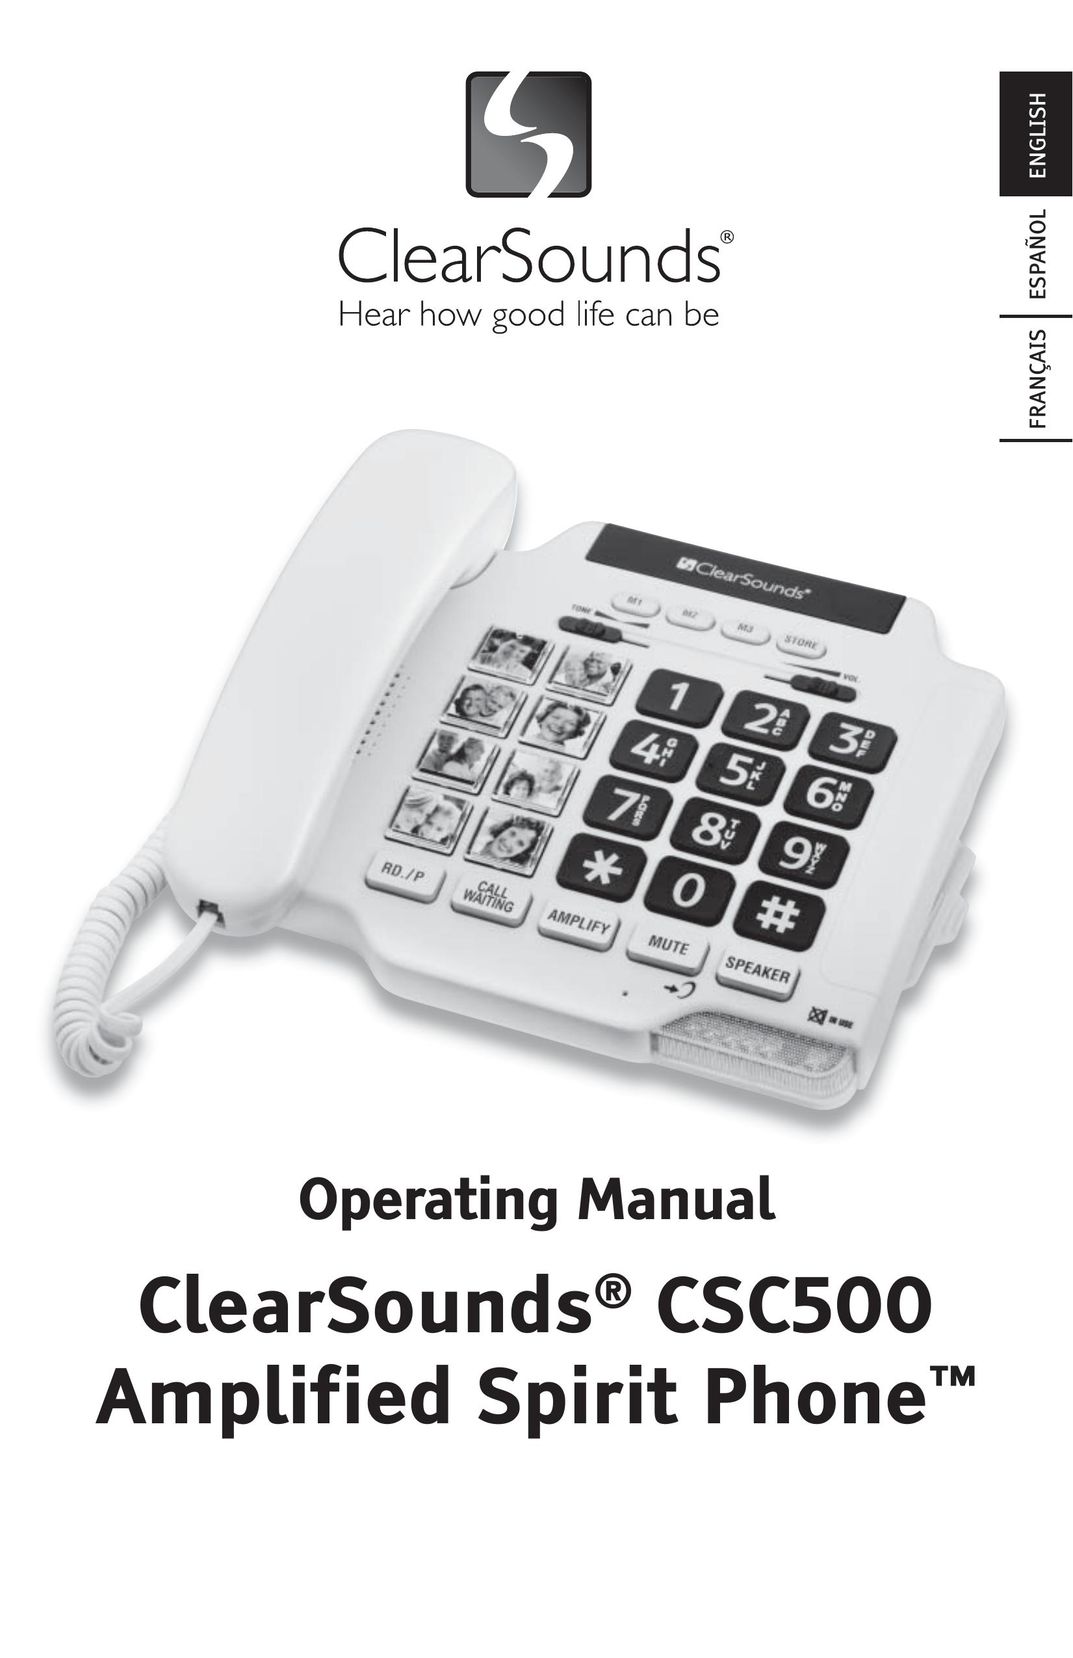 ClearSounds CSC500 Amplified Phone User Manual (Page 1)